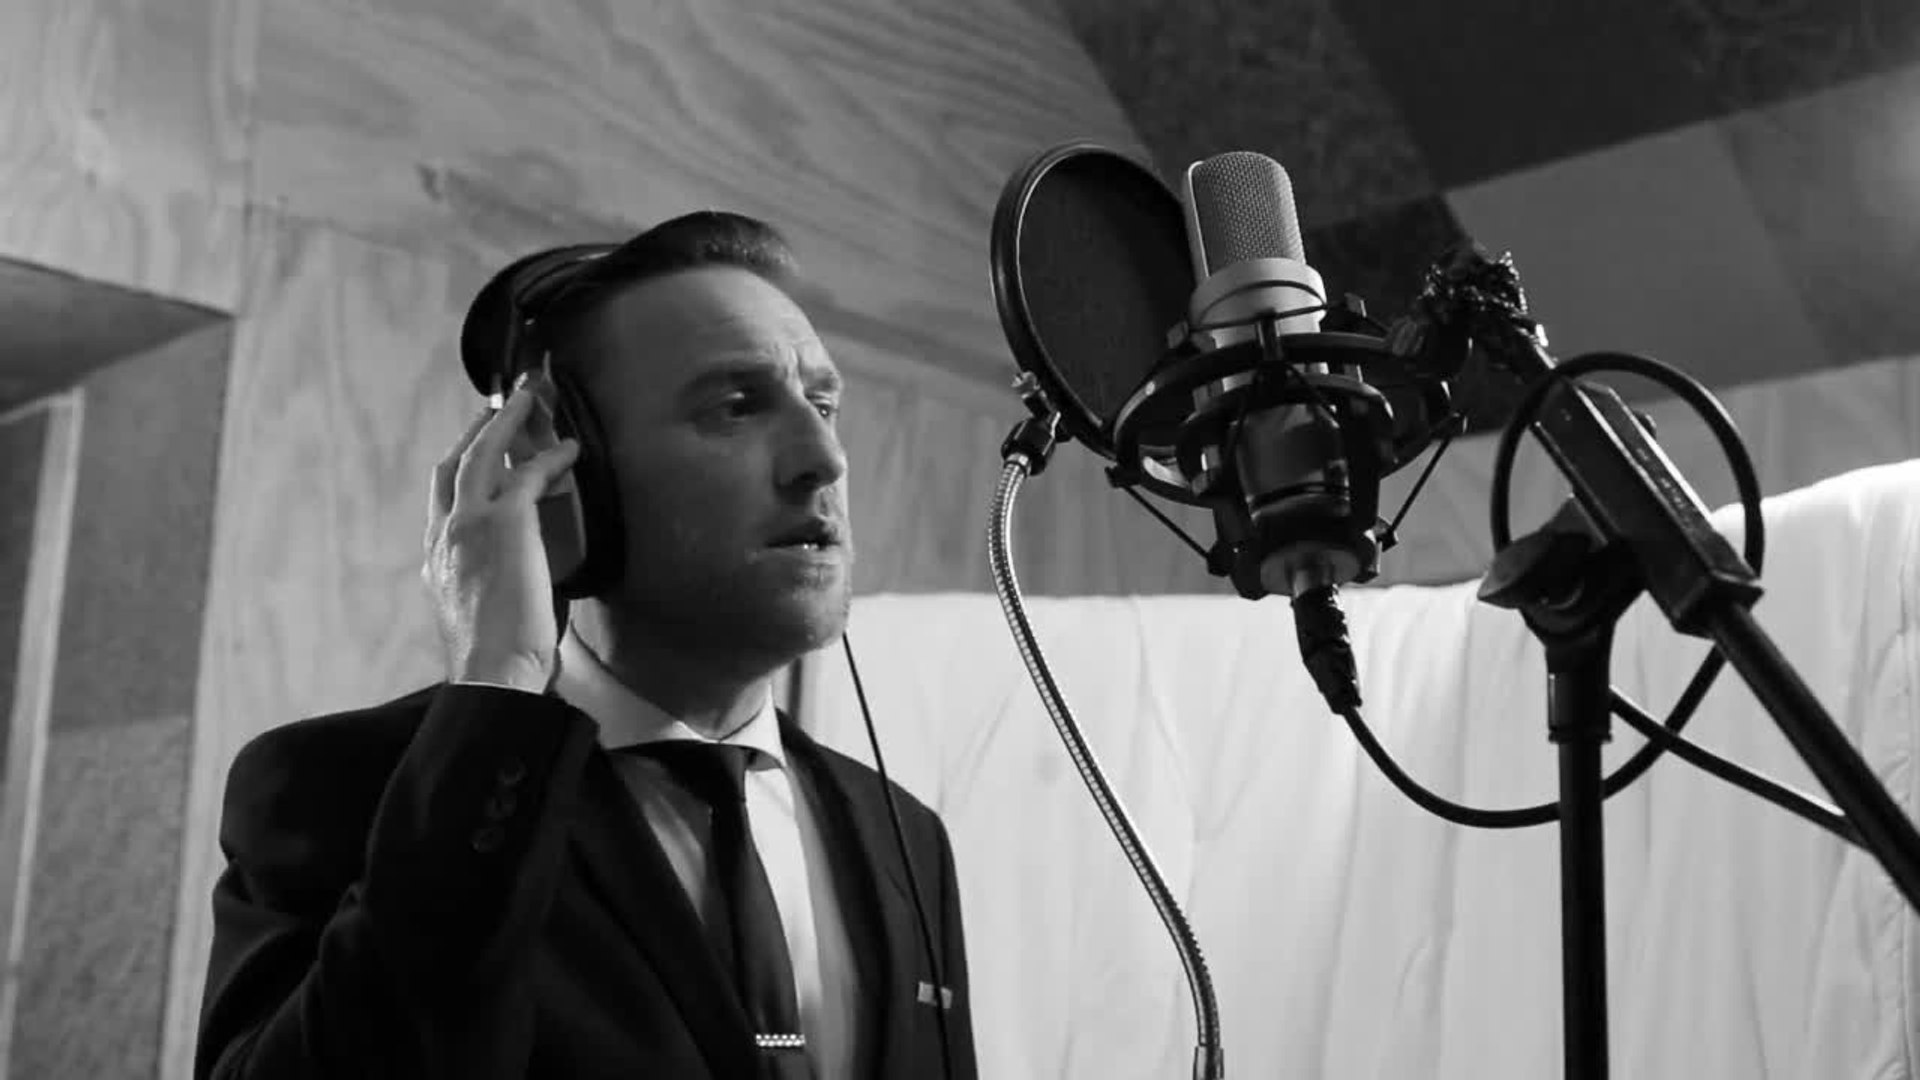 ⁣Talented artist covers Frank Sinatra classic